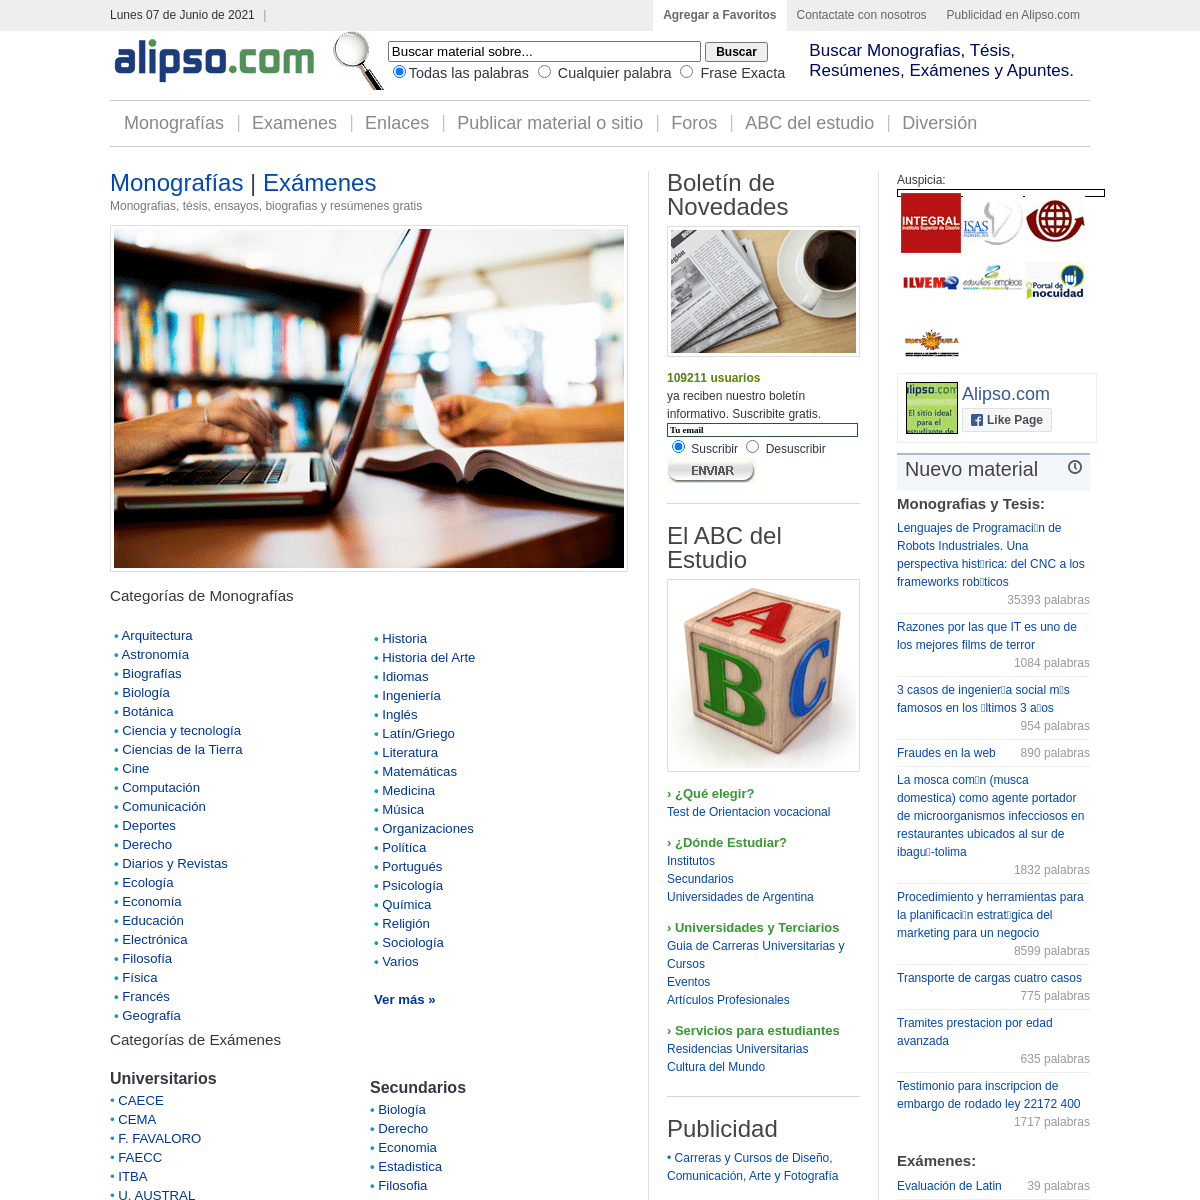 A complete backup of https://alipso.com